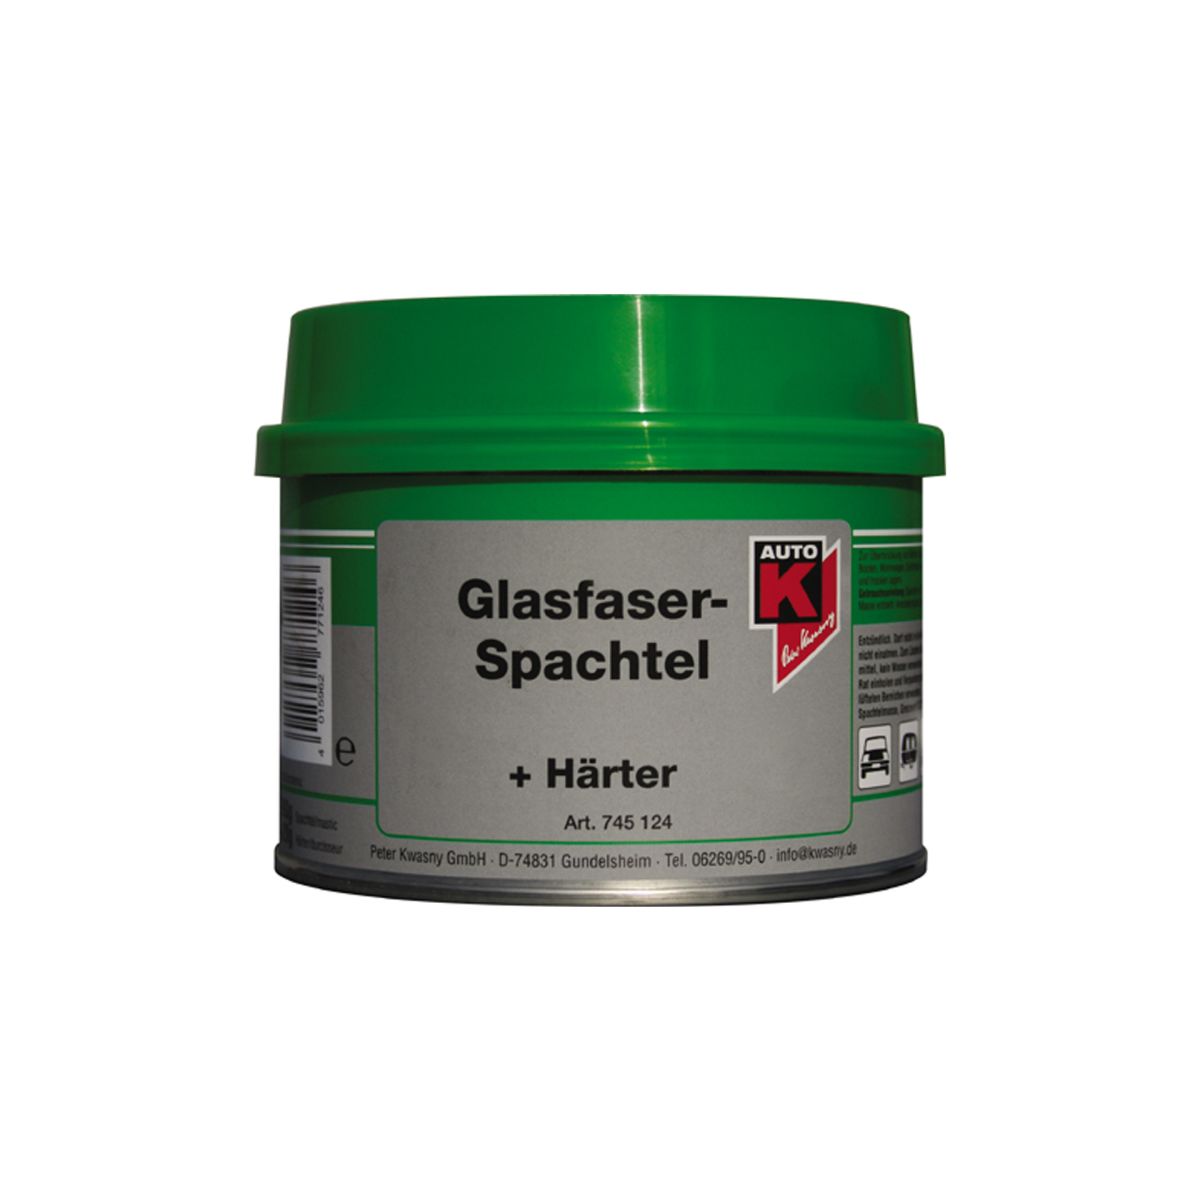 Glass-fibre filler is a highly effective...